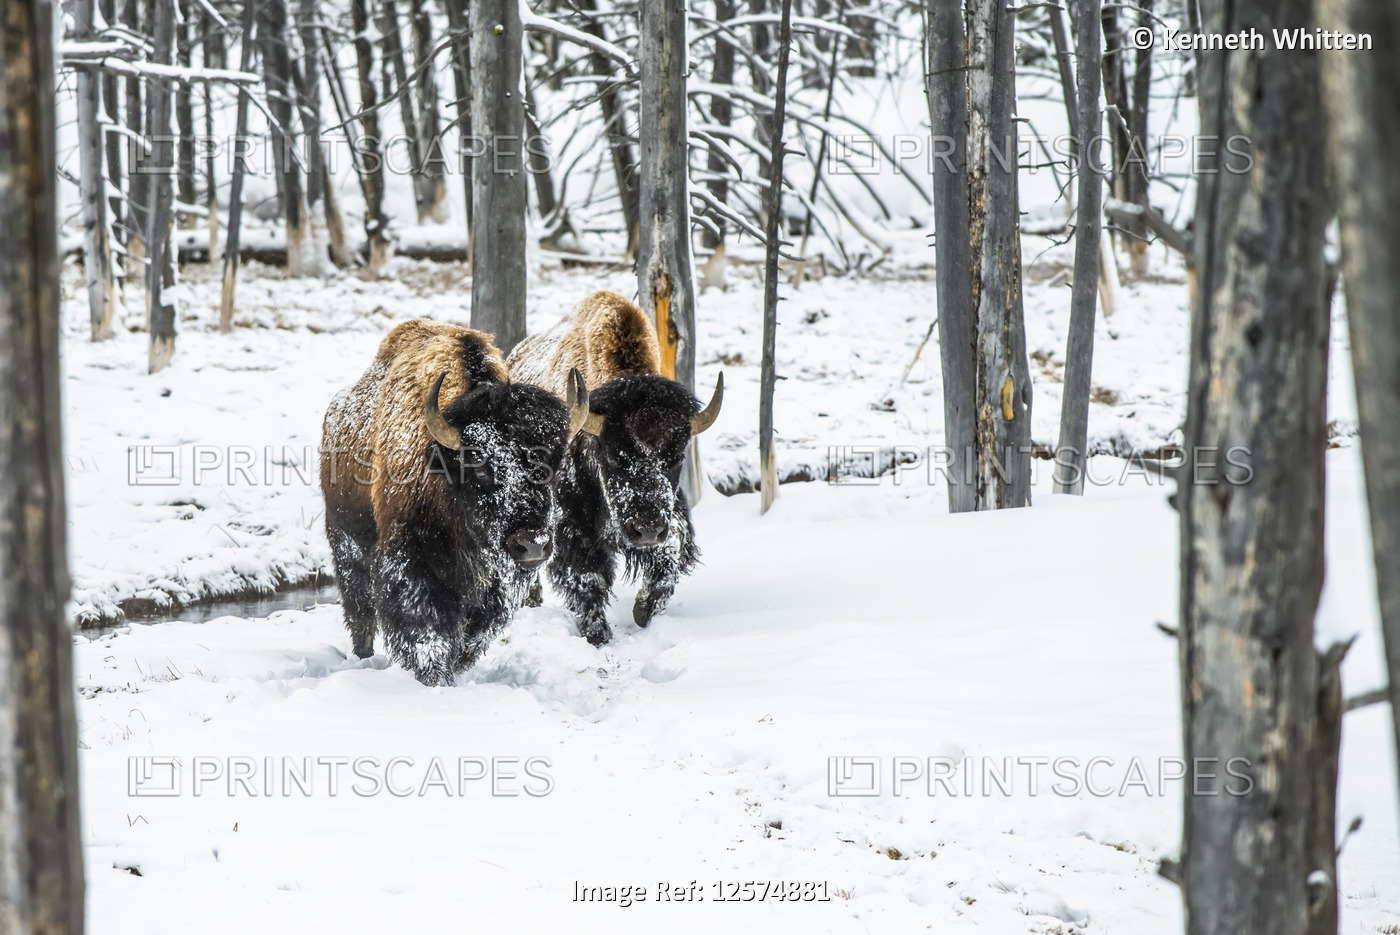 Pair of American Bison bulls in Yellowstone National Park, Wyoming, USA